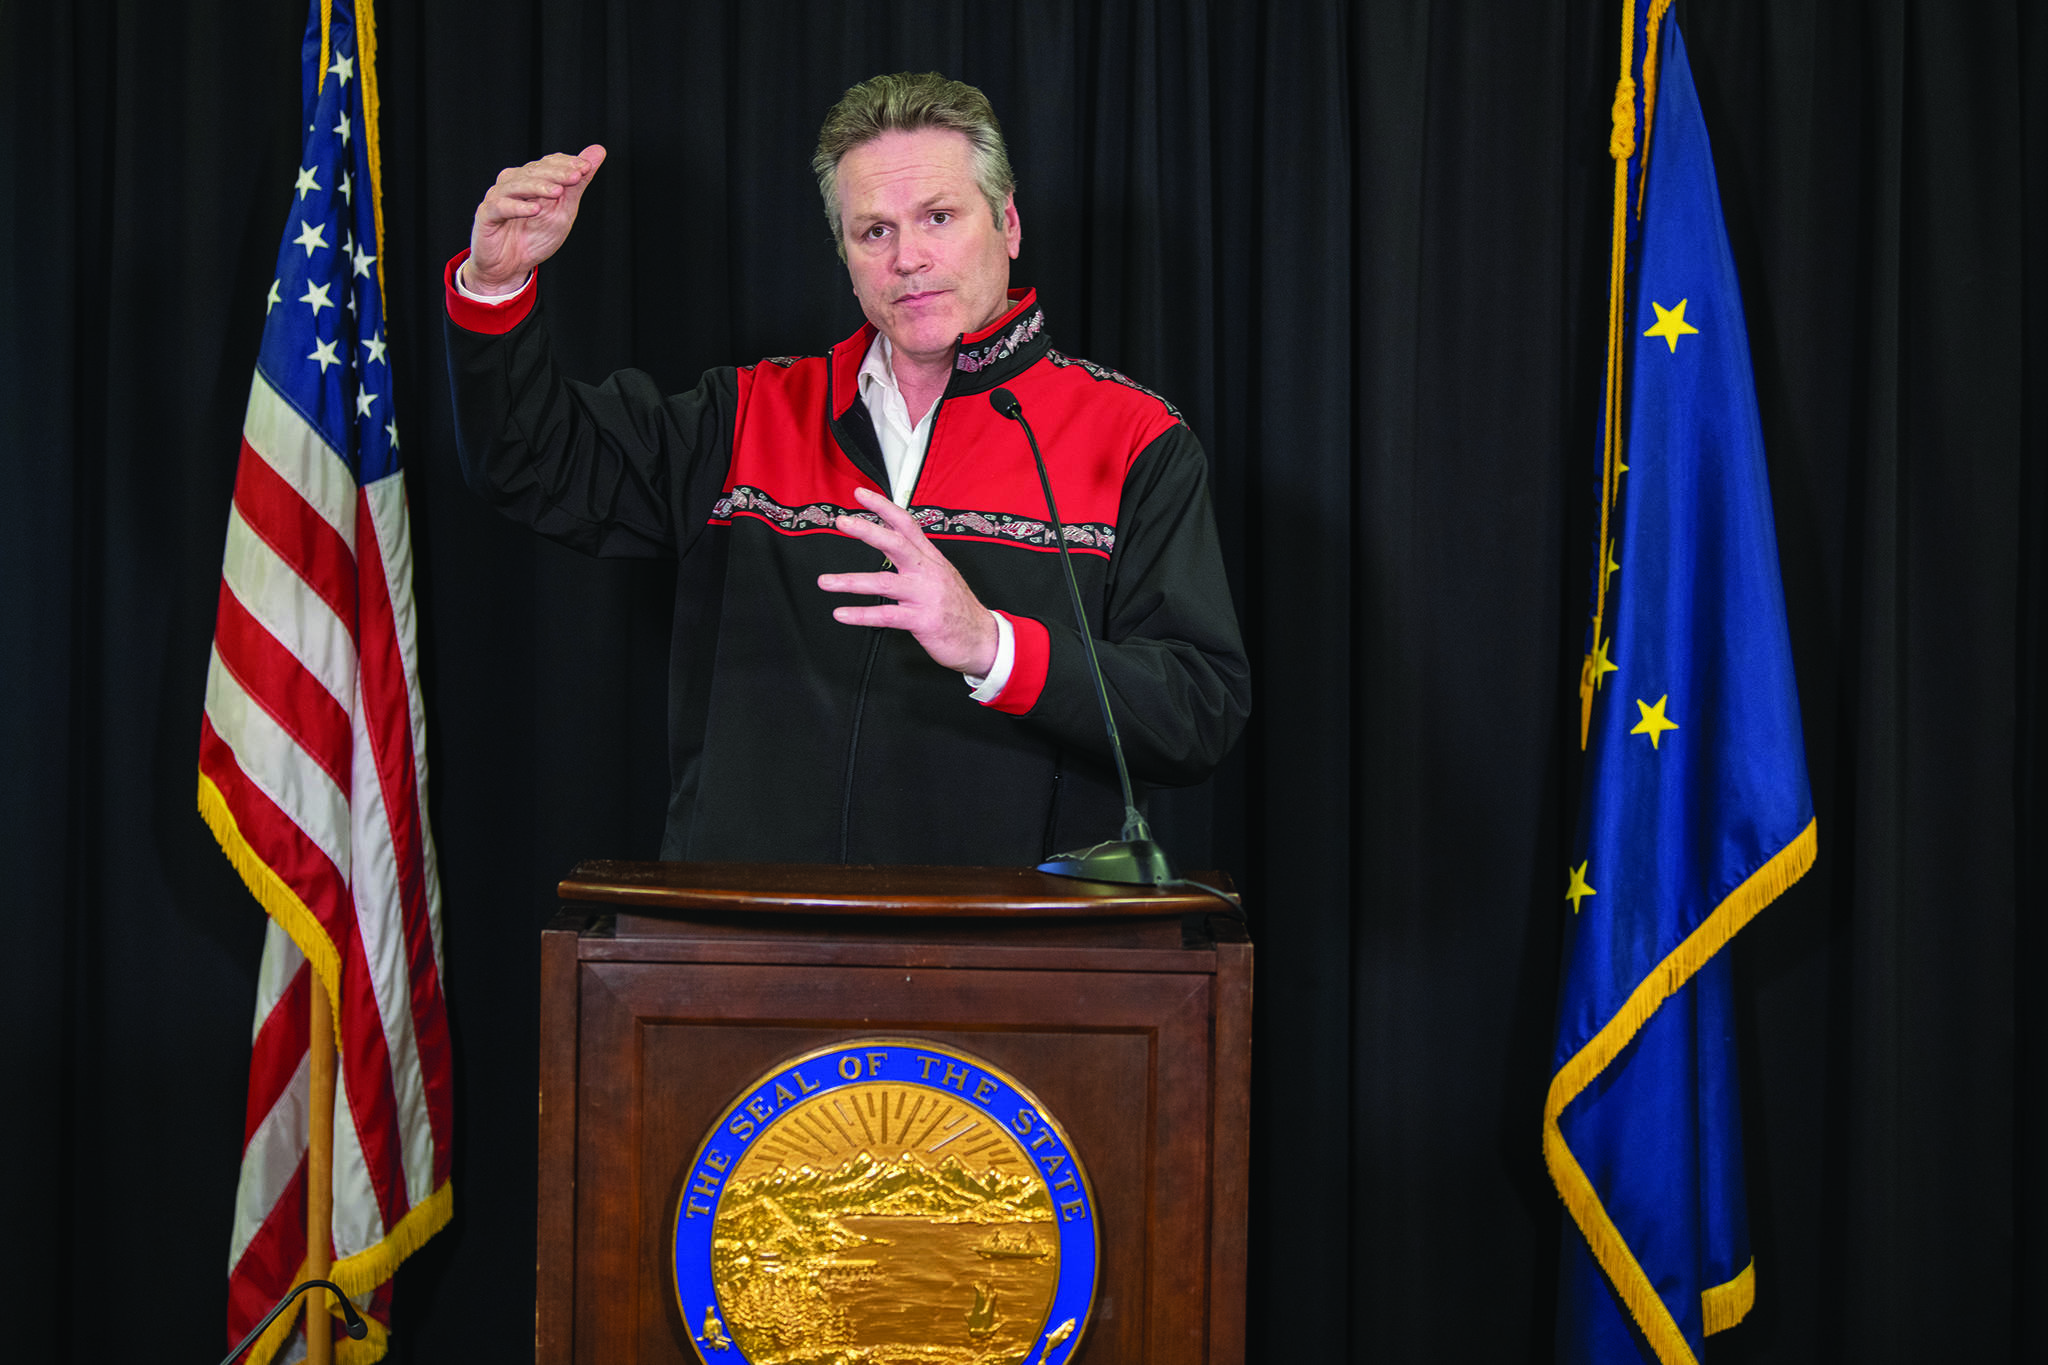 Gov. Mike Dunleavy speaks at a press conference on Monday, April 20, 2020, in Juneau. (Photo by Austin McDaniel/Office of the Governor)